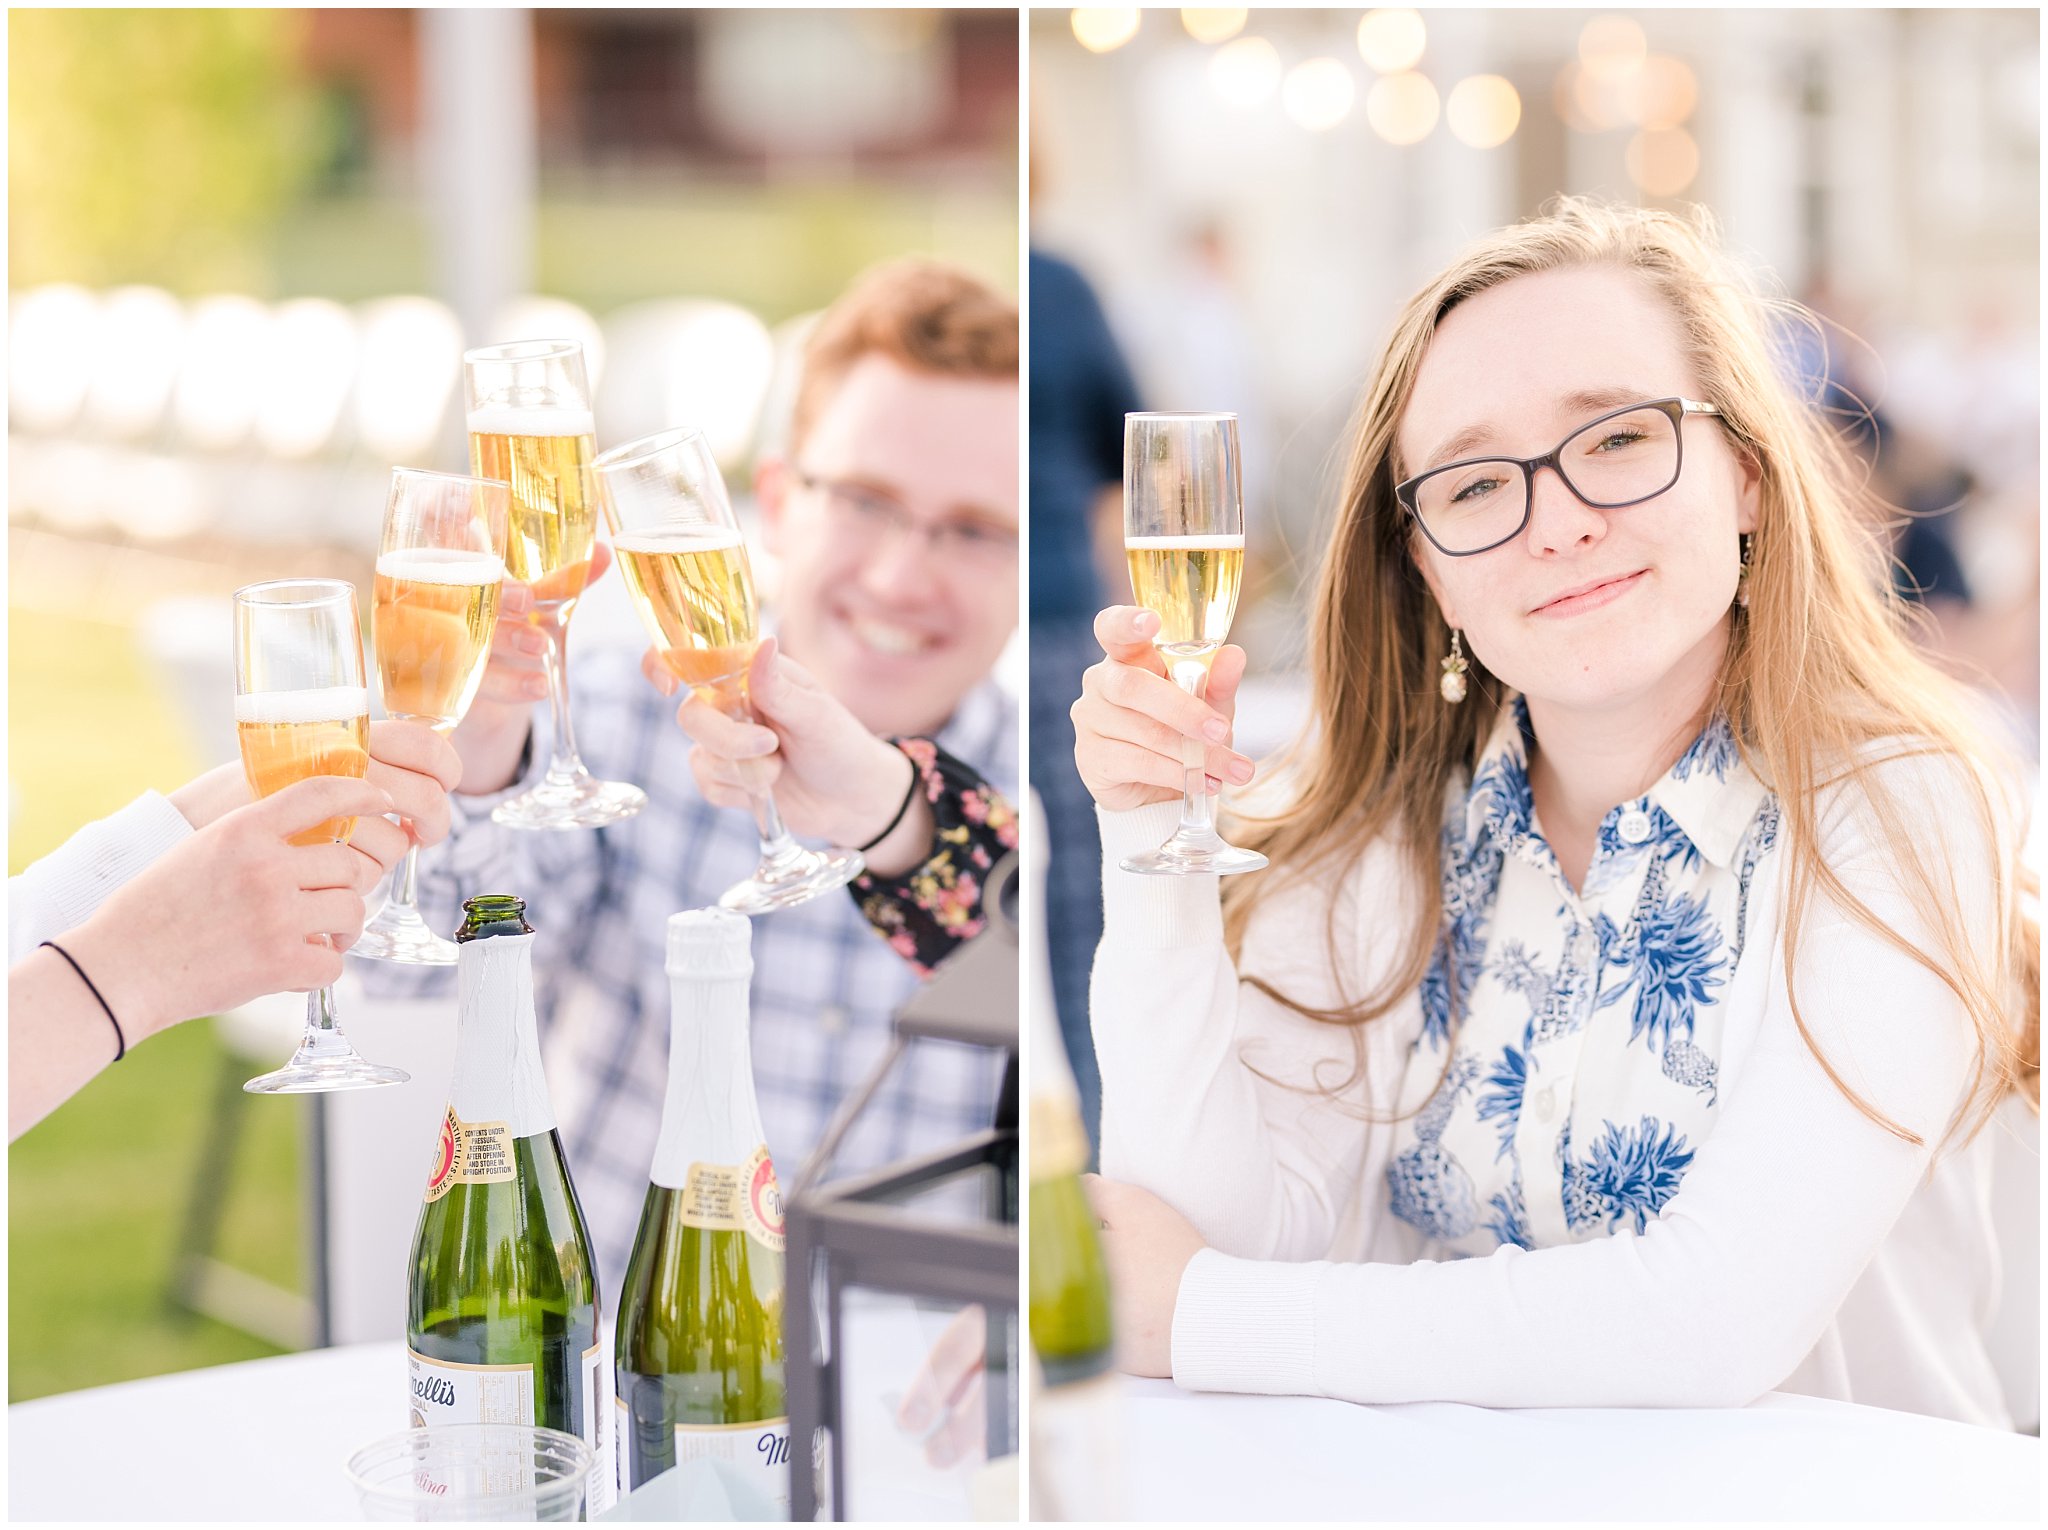 Wedding guests toasting | Backyard outdoor spring wedding with grey, blush, and light blue wedding colors | Spring Provo City Center Temple Wedding | Utah Wedding Photographers | Jessie and Dallin Photography